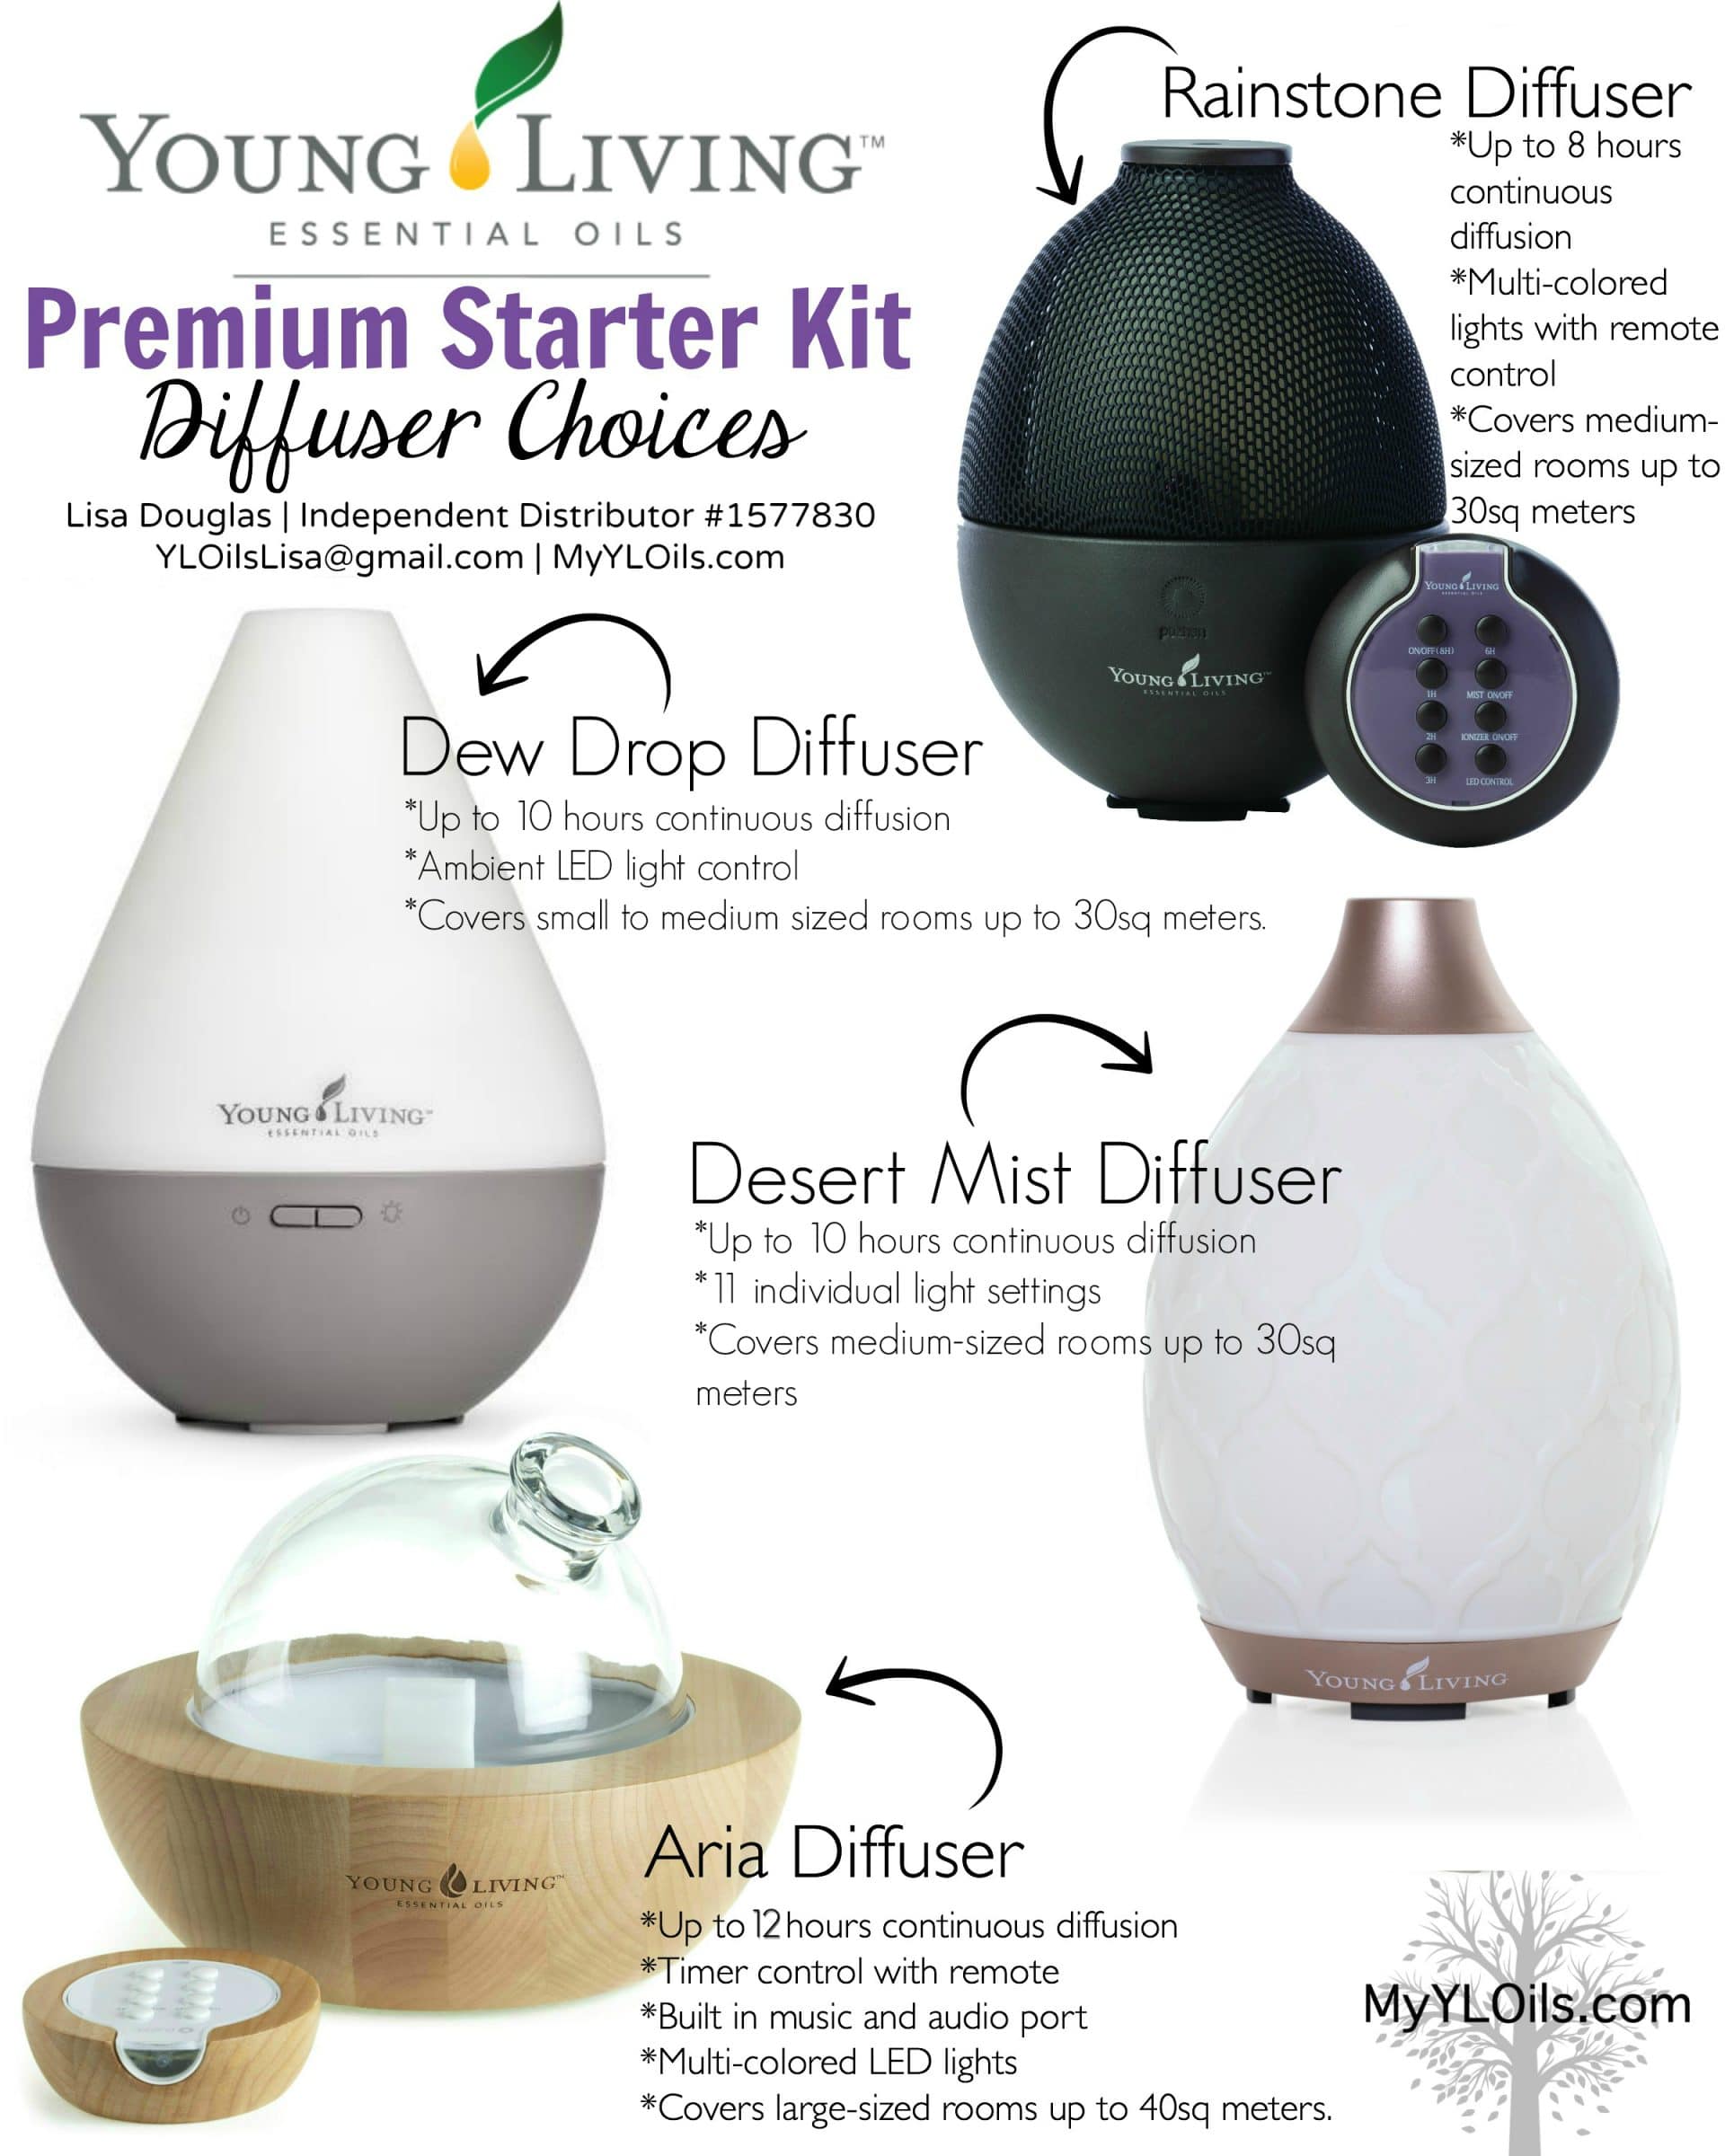 Young Living Premium Starter Kit Diffuser Choices for 2019